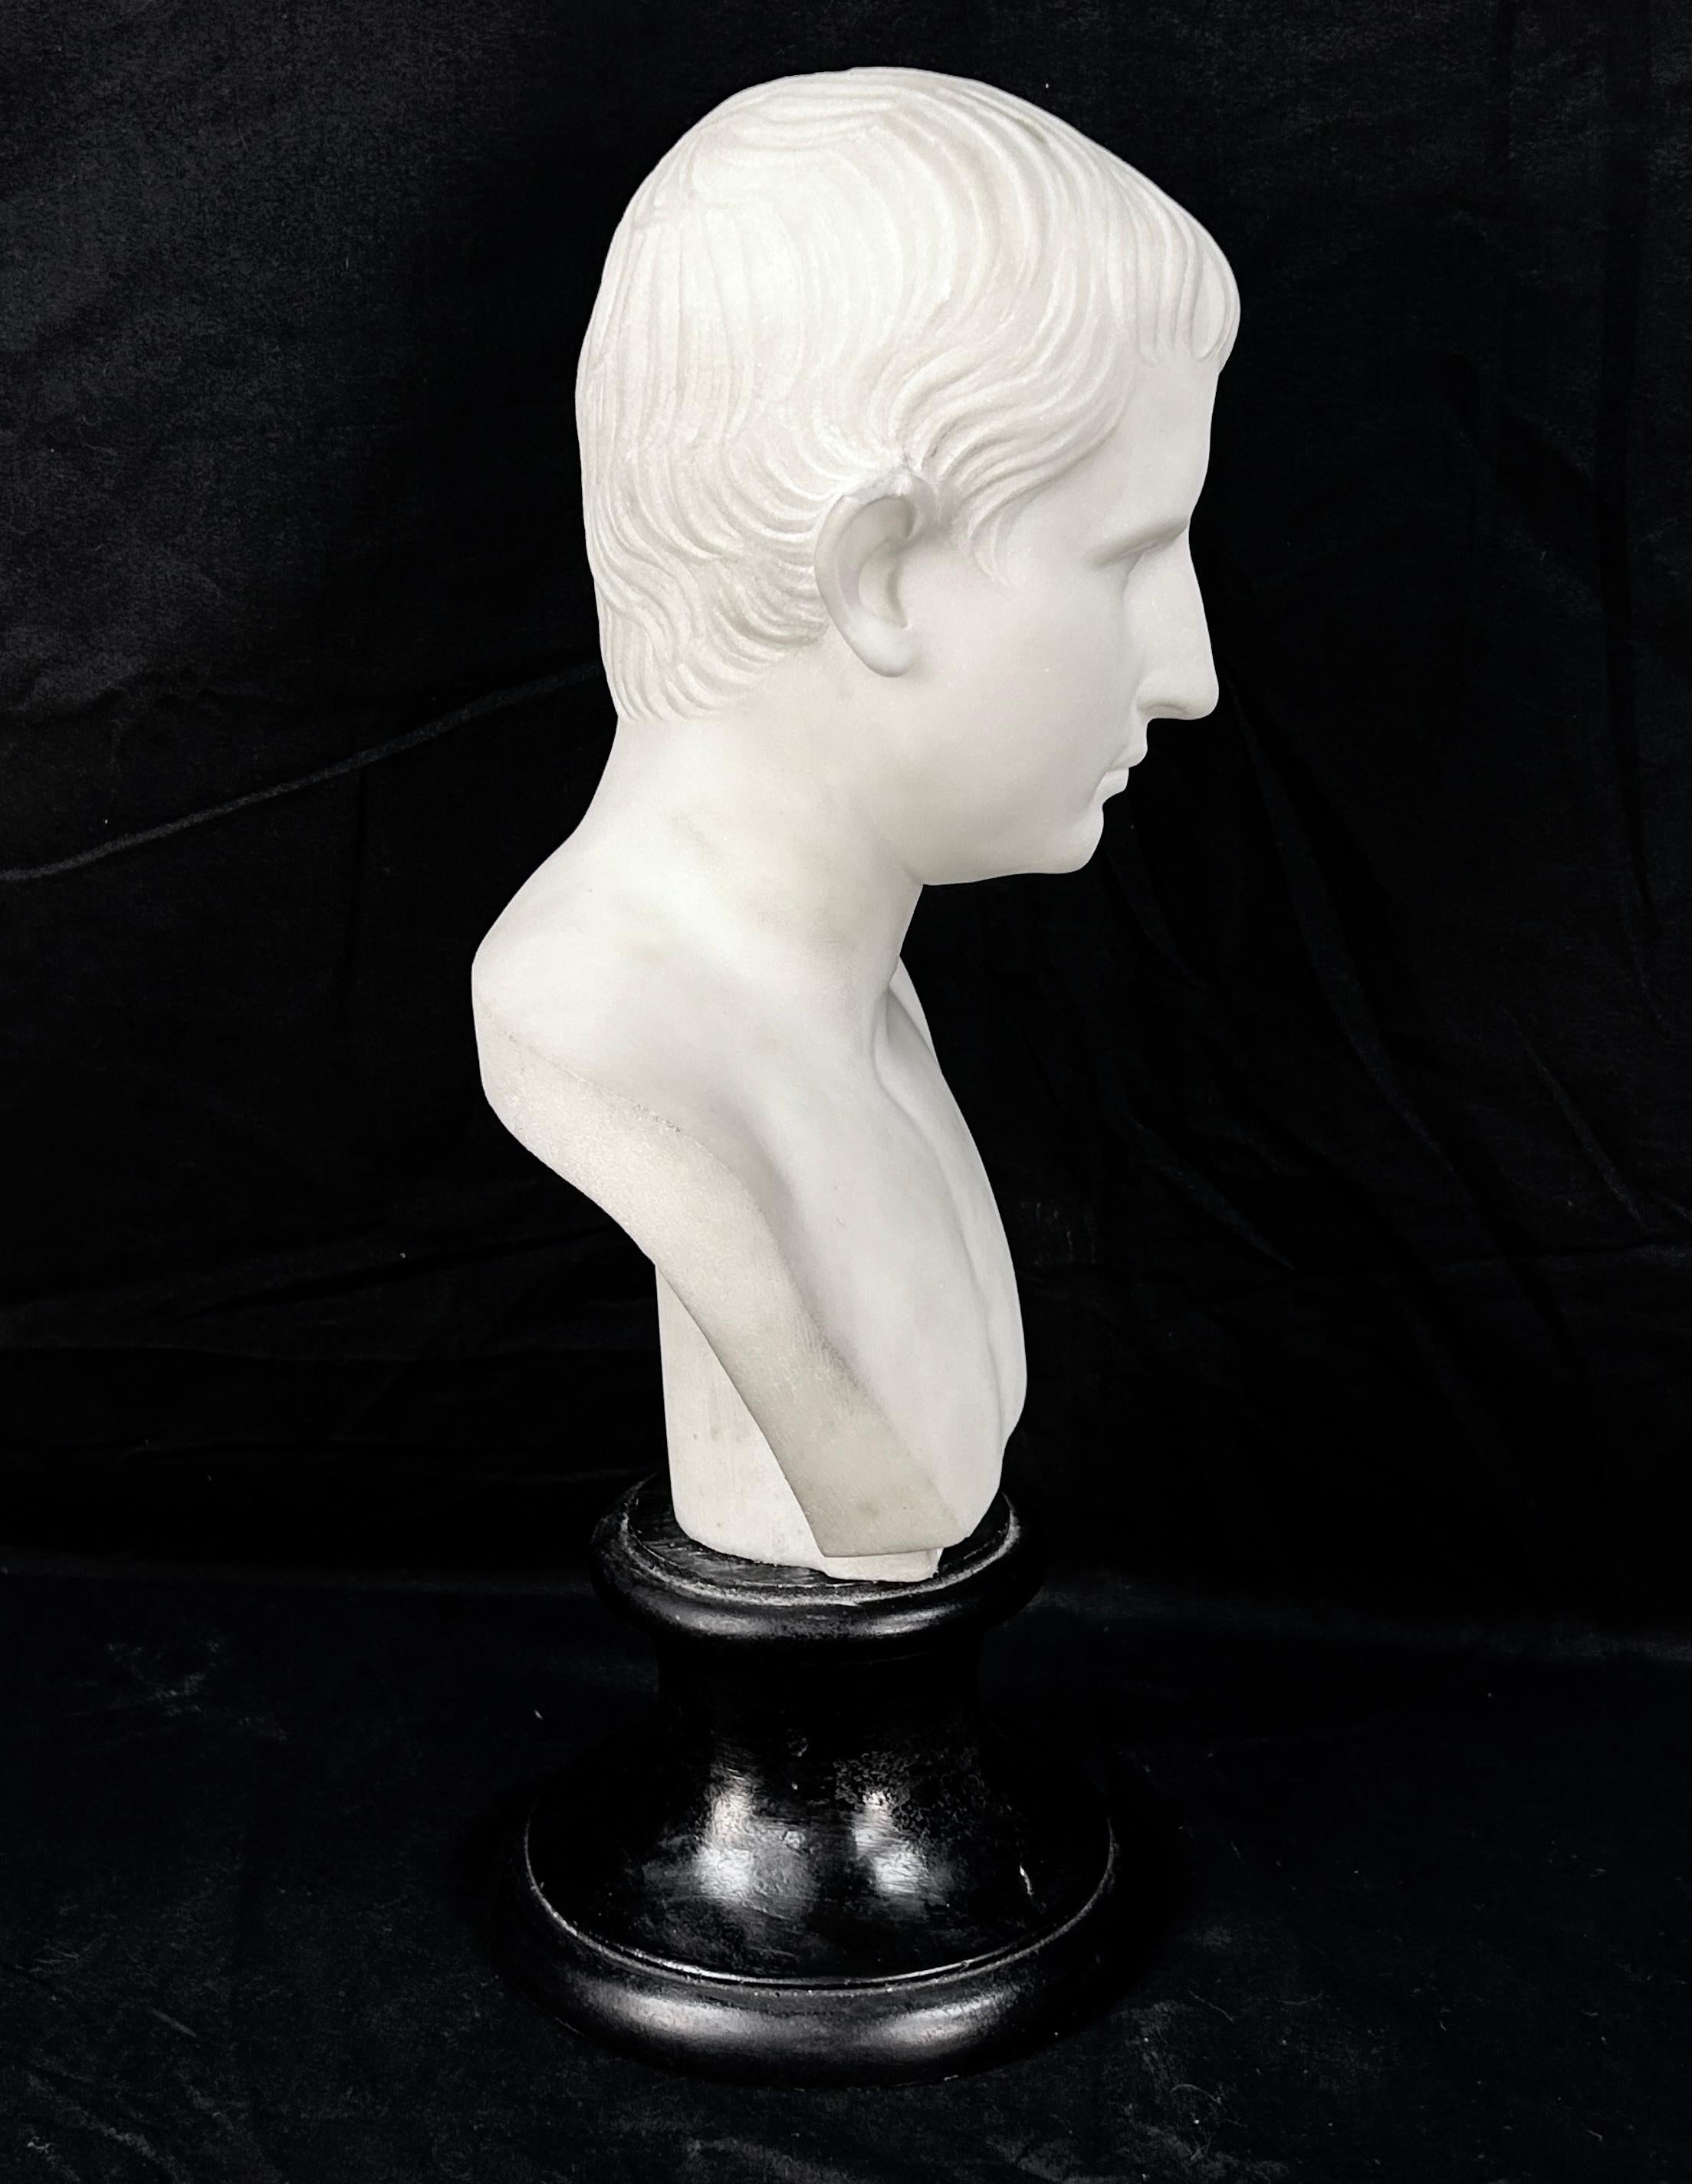 19th Century Italian Grand Tour Marble Bust of Augustus Caesar by Antonio Frilli. White marble bust is on a black plinth. Antonio Frilli was a Florentine sculptor who specialized in marble and alabaster statutes and was well known in Europe, the